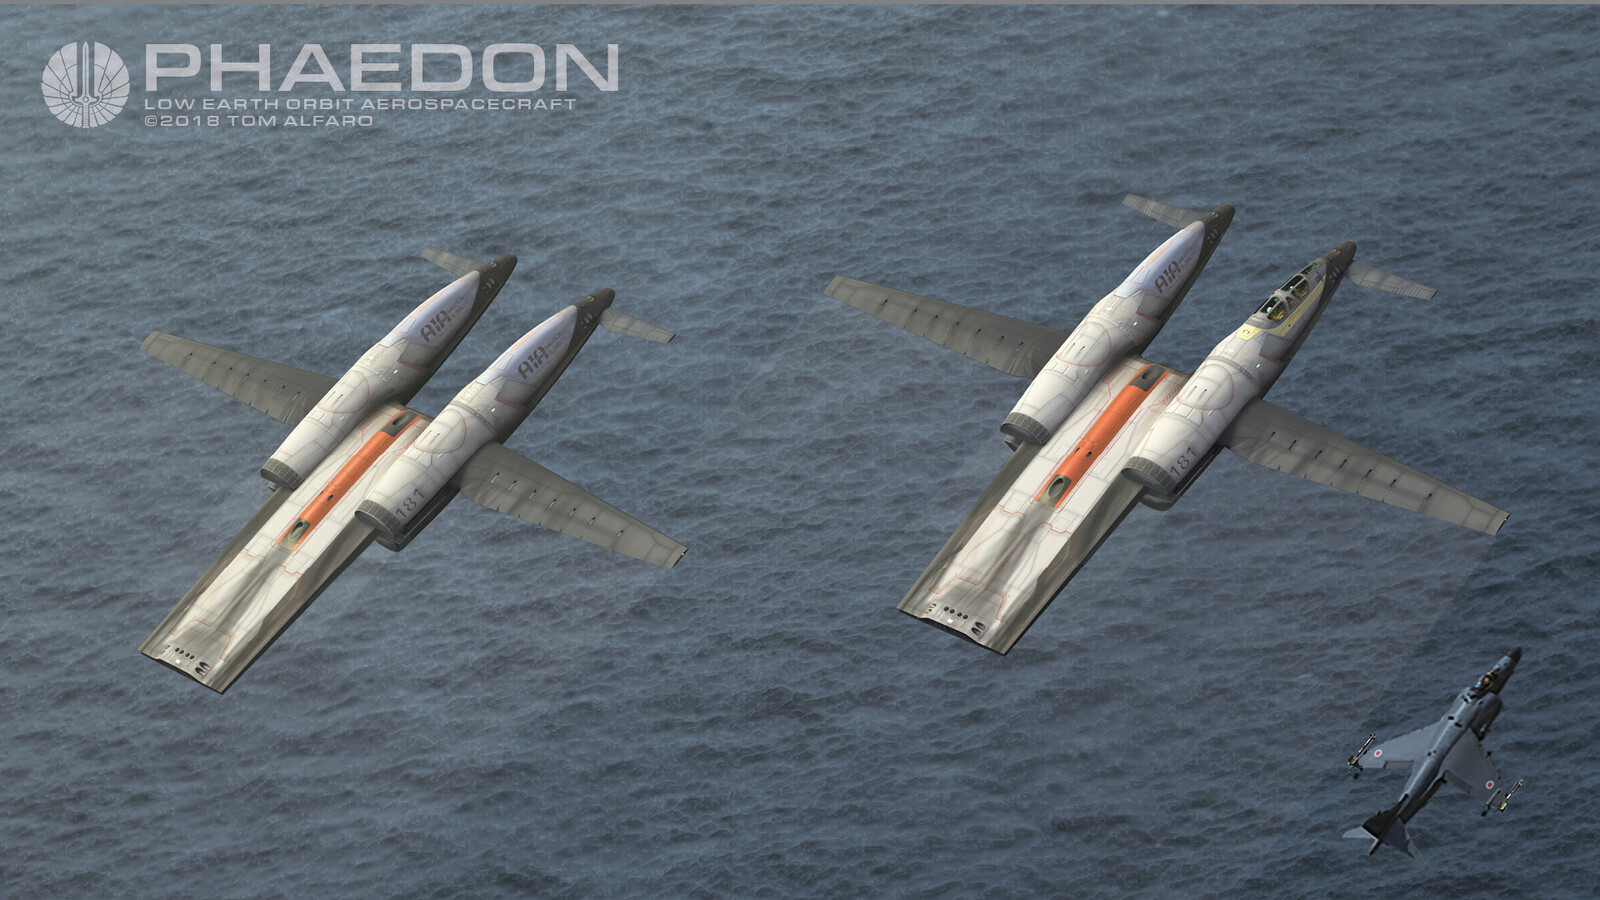 Phaedon drone operations, while discouraged, are permissible within specific airspace; stakeholders are keen to monitor their compliance. At the conclusion of this mission, escort ensures a safe return to their platform of origin. 
